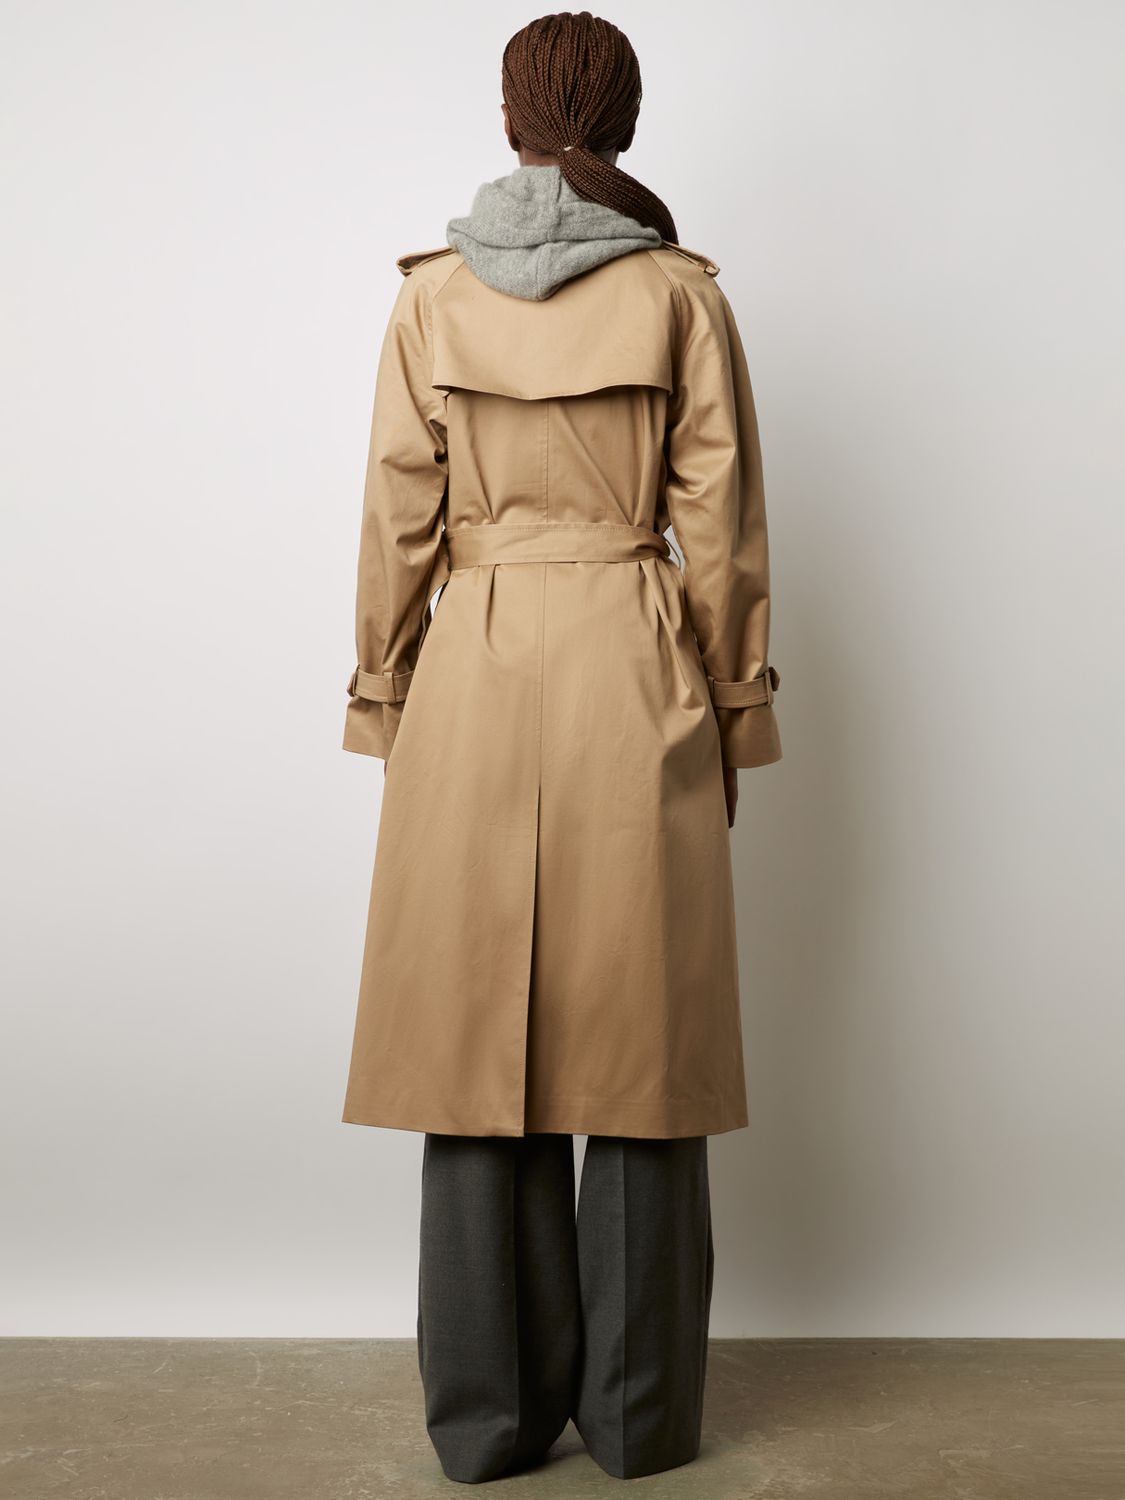 Buy Gerard Darel Serge Double Breasted Cotton Trench Coat, Beige Online at johnlewis.com